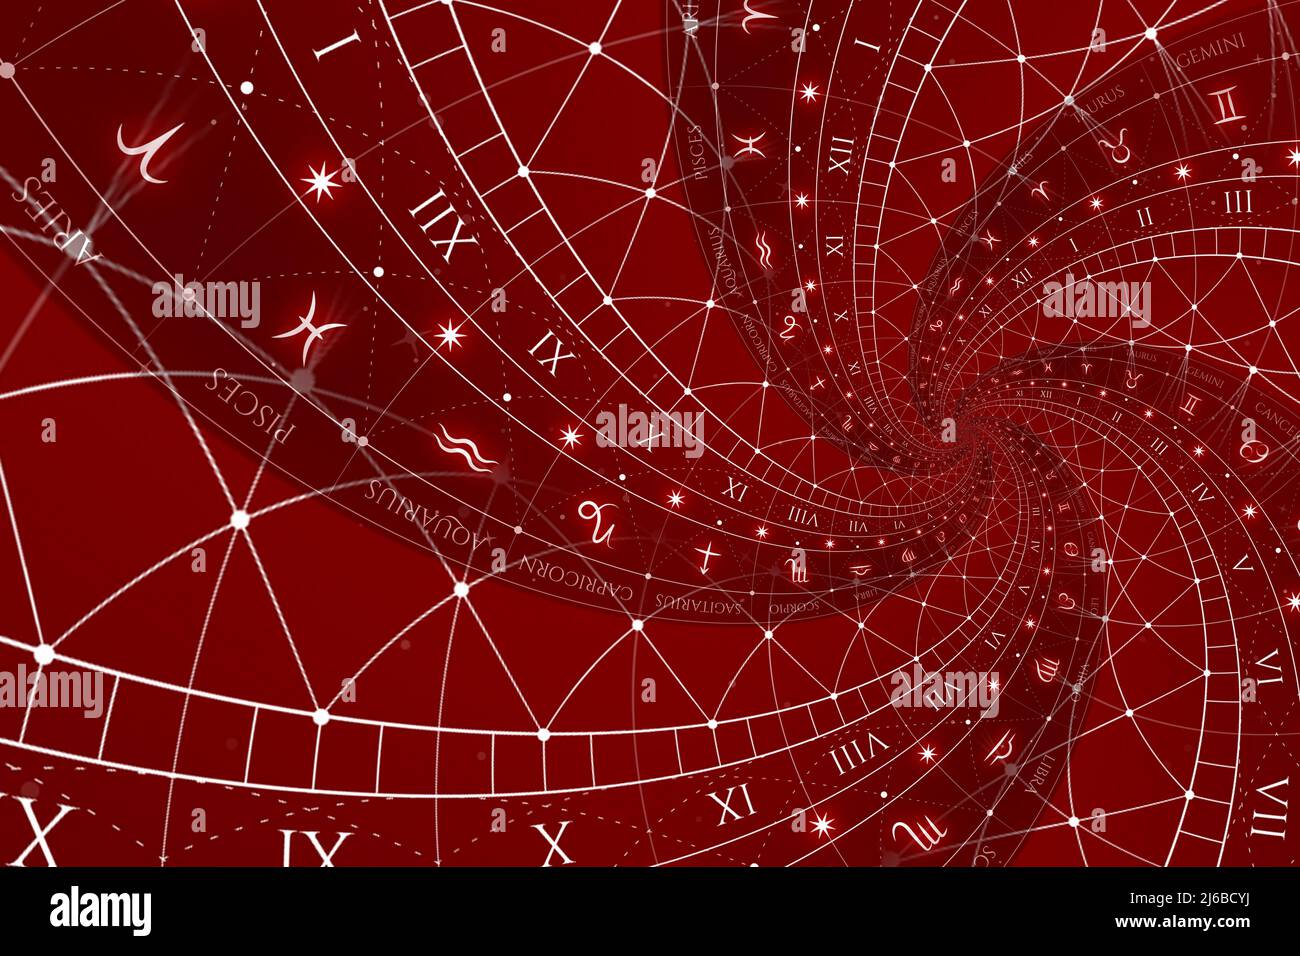 Abstract old conceptual background on mysticism, astrology, fantasy - red Stock Photo